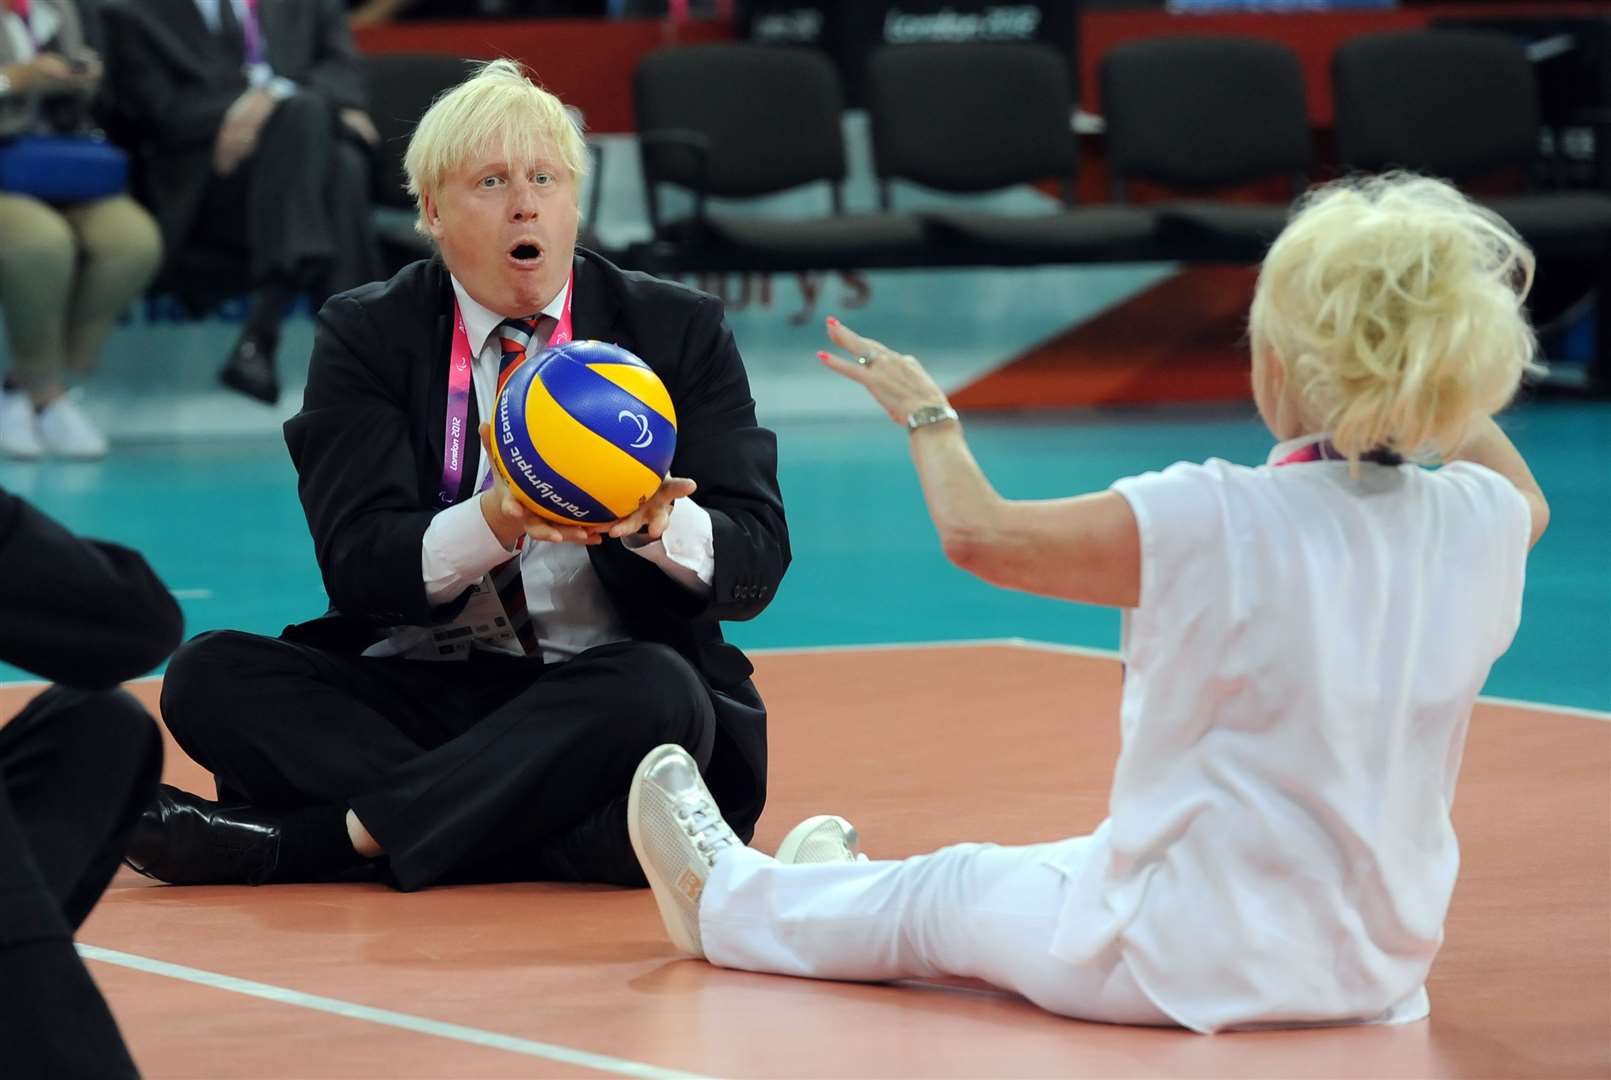 He also managed a game of sitting volleyball with actress Barbara Windsor (Anna Gowthorpe/PA)